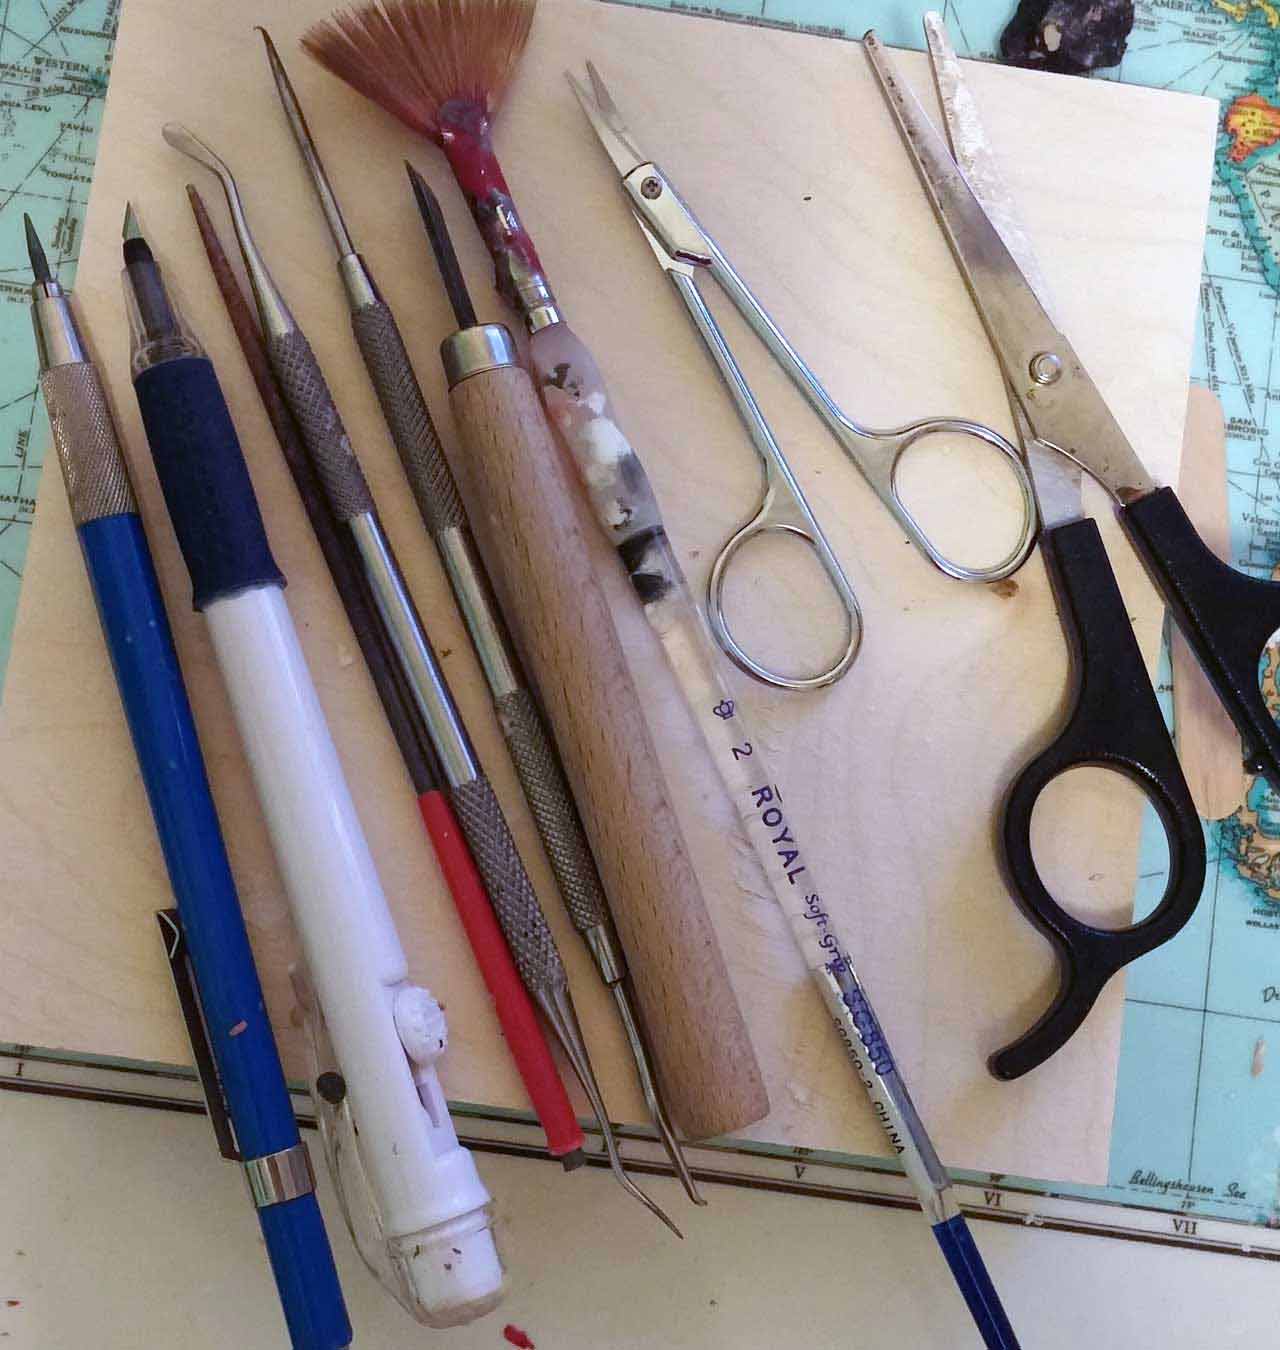 more sculpting and crafting tools on desk